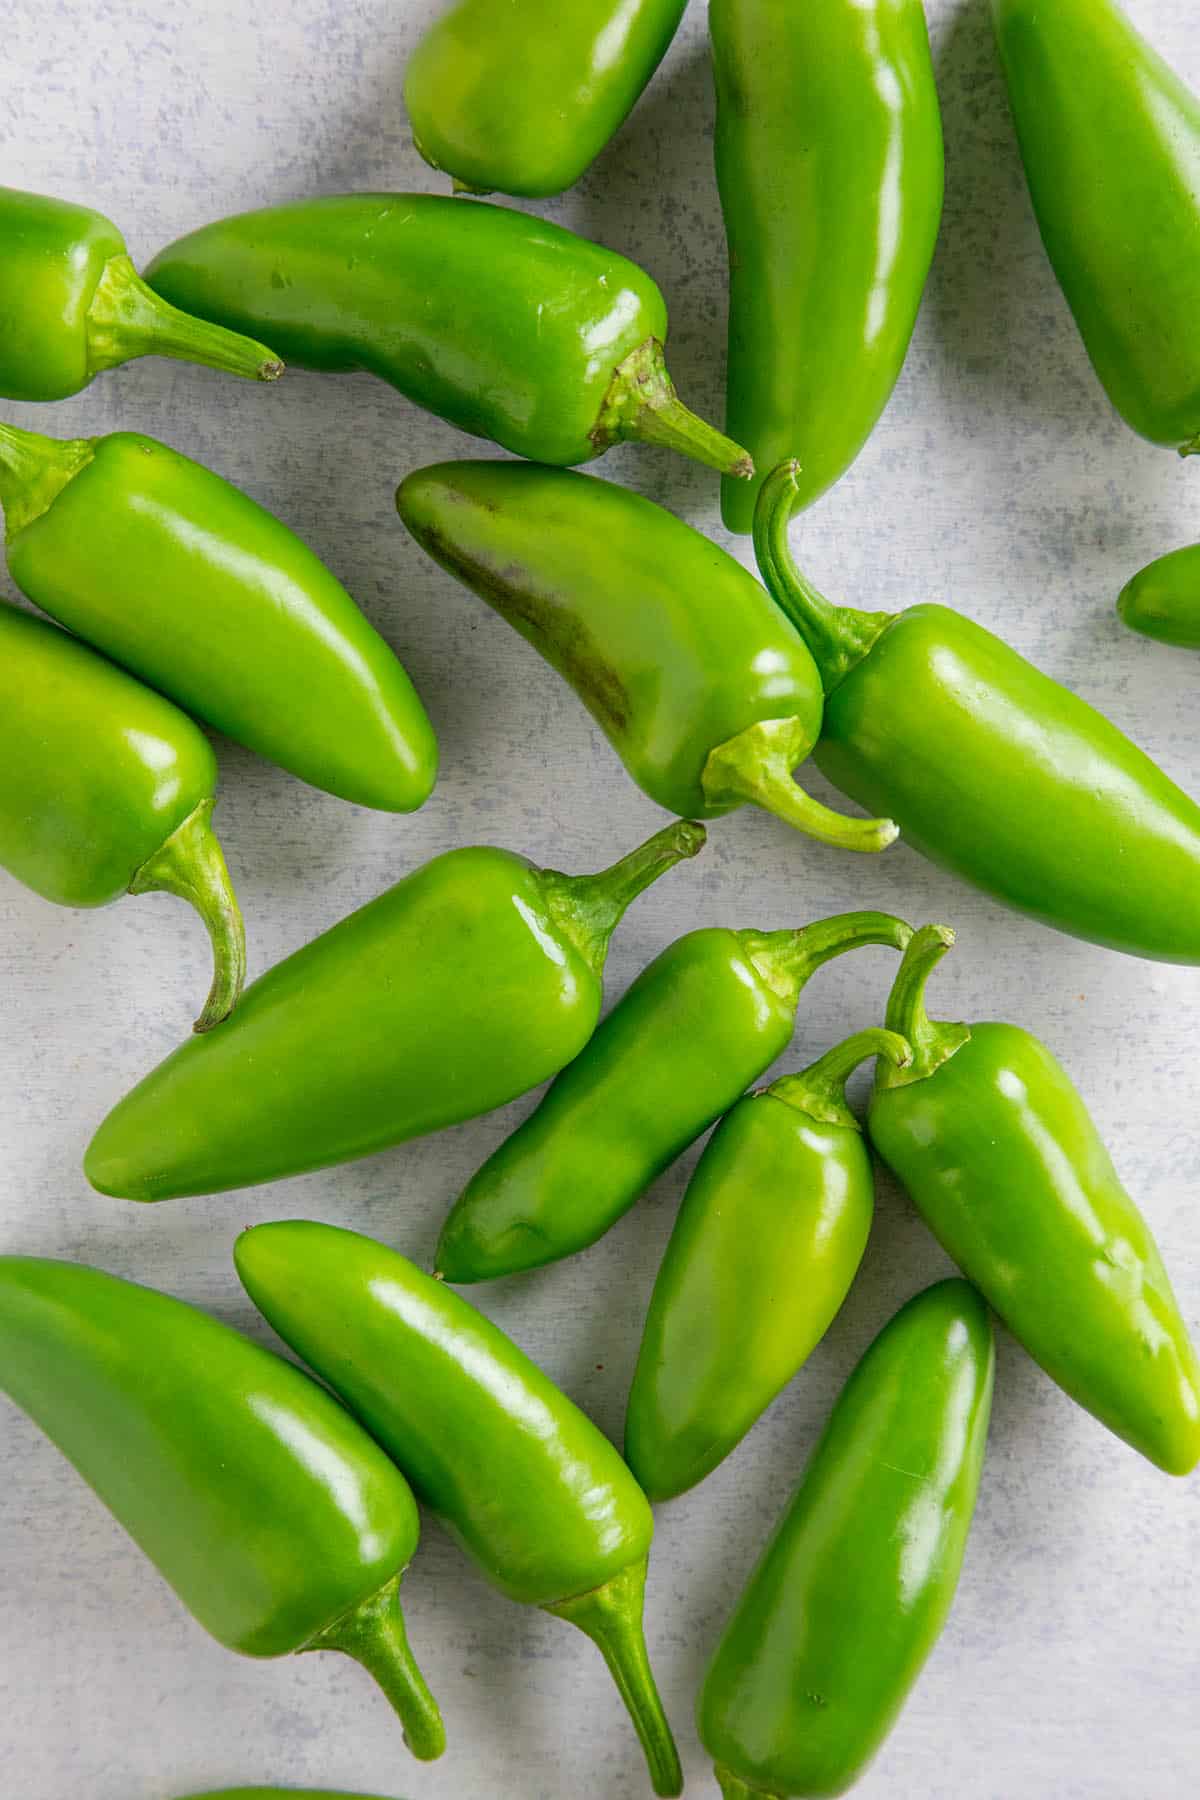 A Pile of Jalapeno Peppers